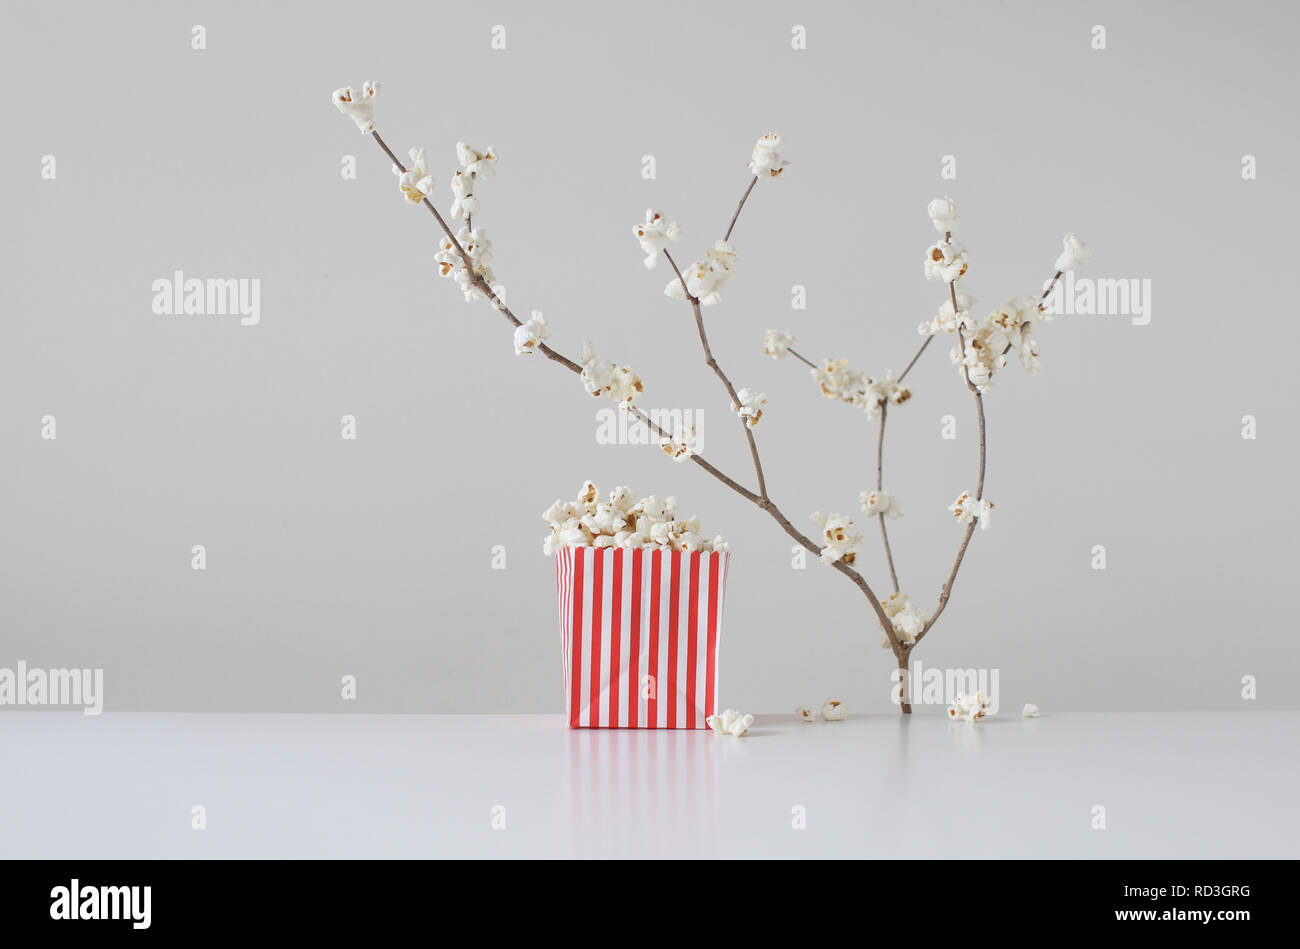 Conceptual cherry blossom and a bag of popcorn Stock Photo